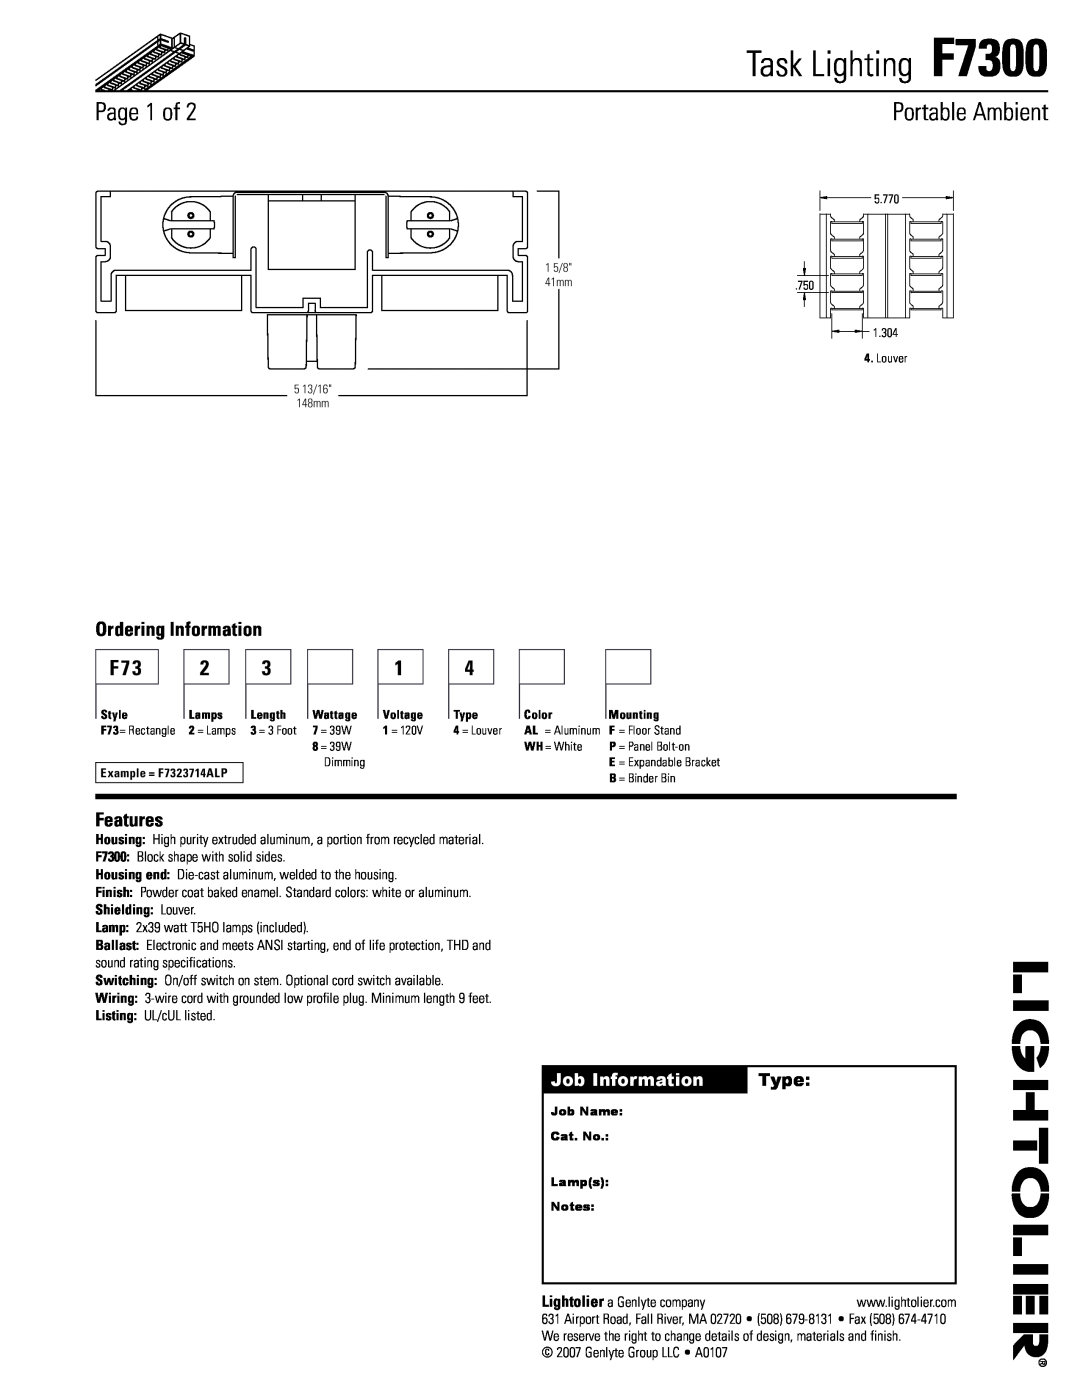 Lightolier specifications Page of, Portable Ambient, Job Information, Type, Task Lighting F7300, Ordering Information 